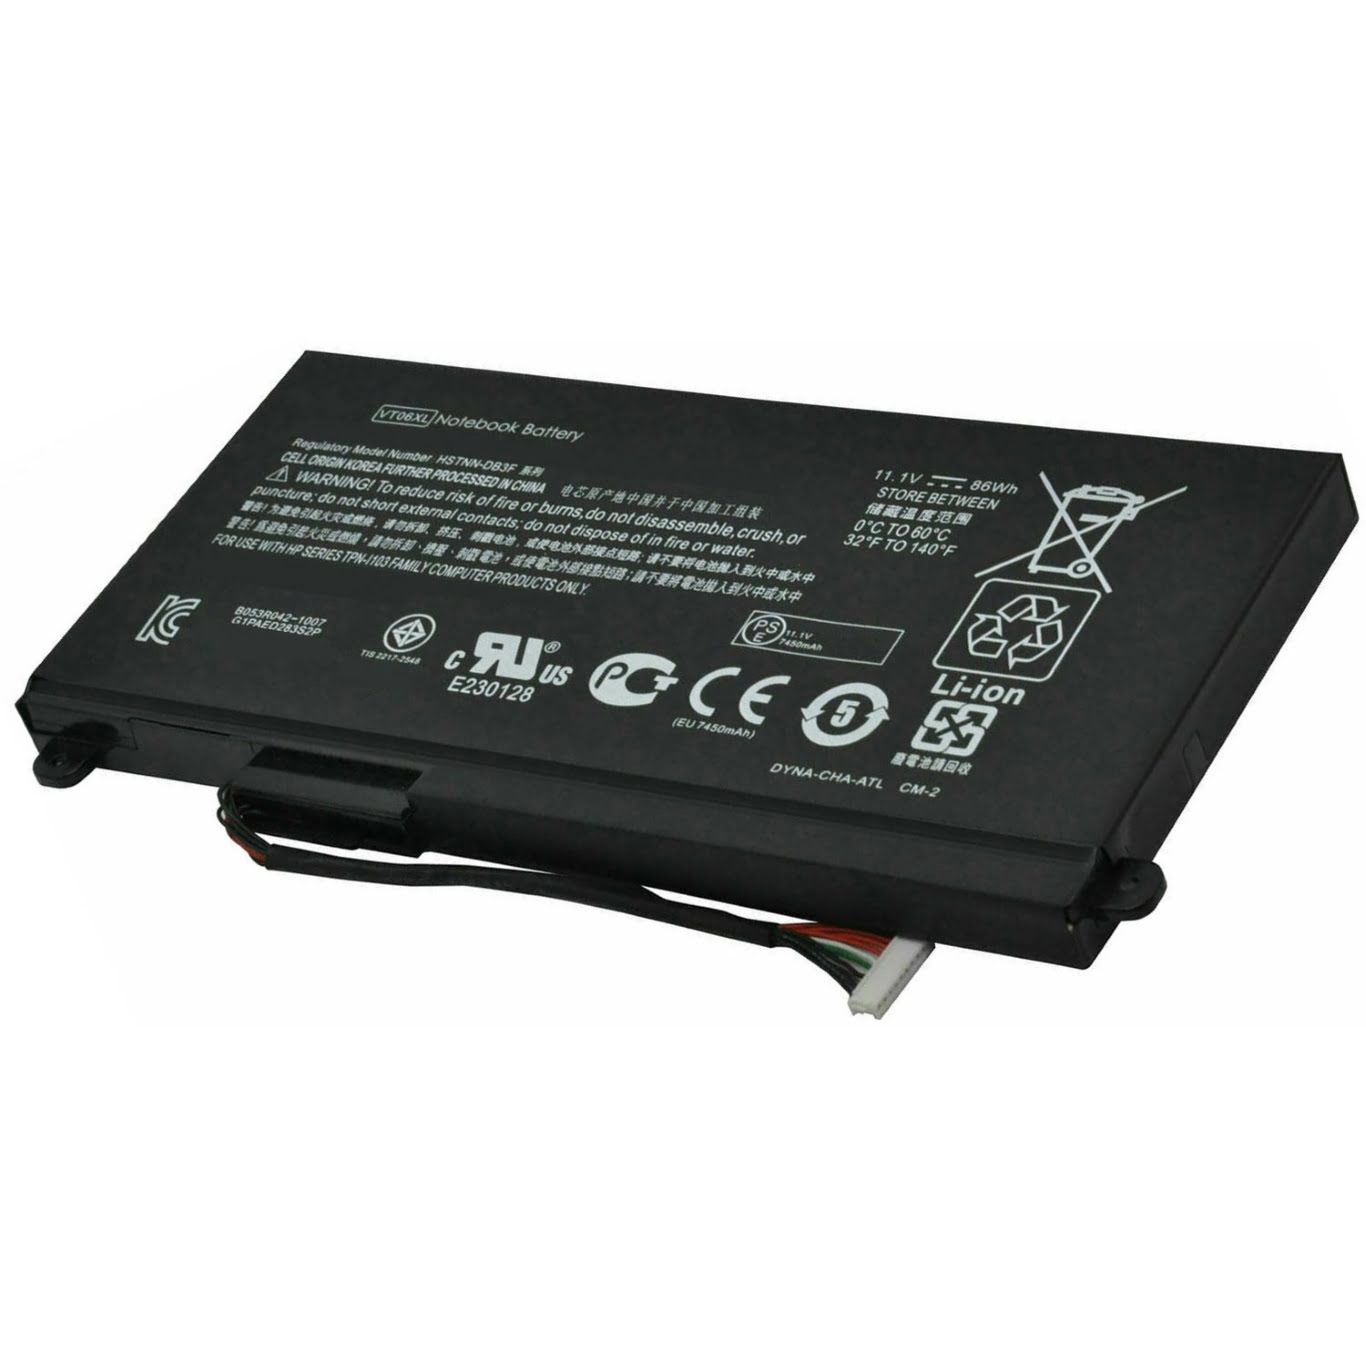 3ICP7/67/90-2, 657240-151 replacement Laptop Battery for HP Envy 17-3000 Series, ENVY 17-3000EA, 6 cells, 11.1V, 86wh